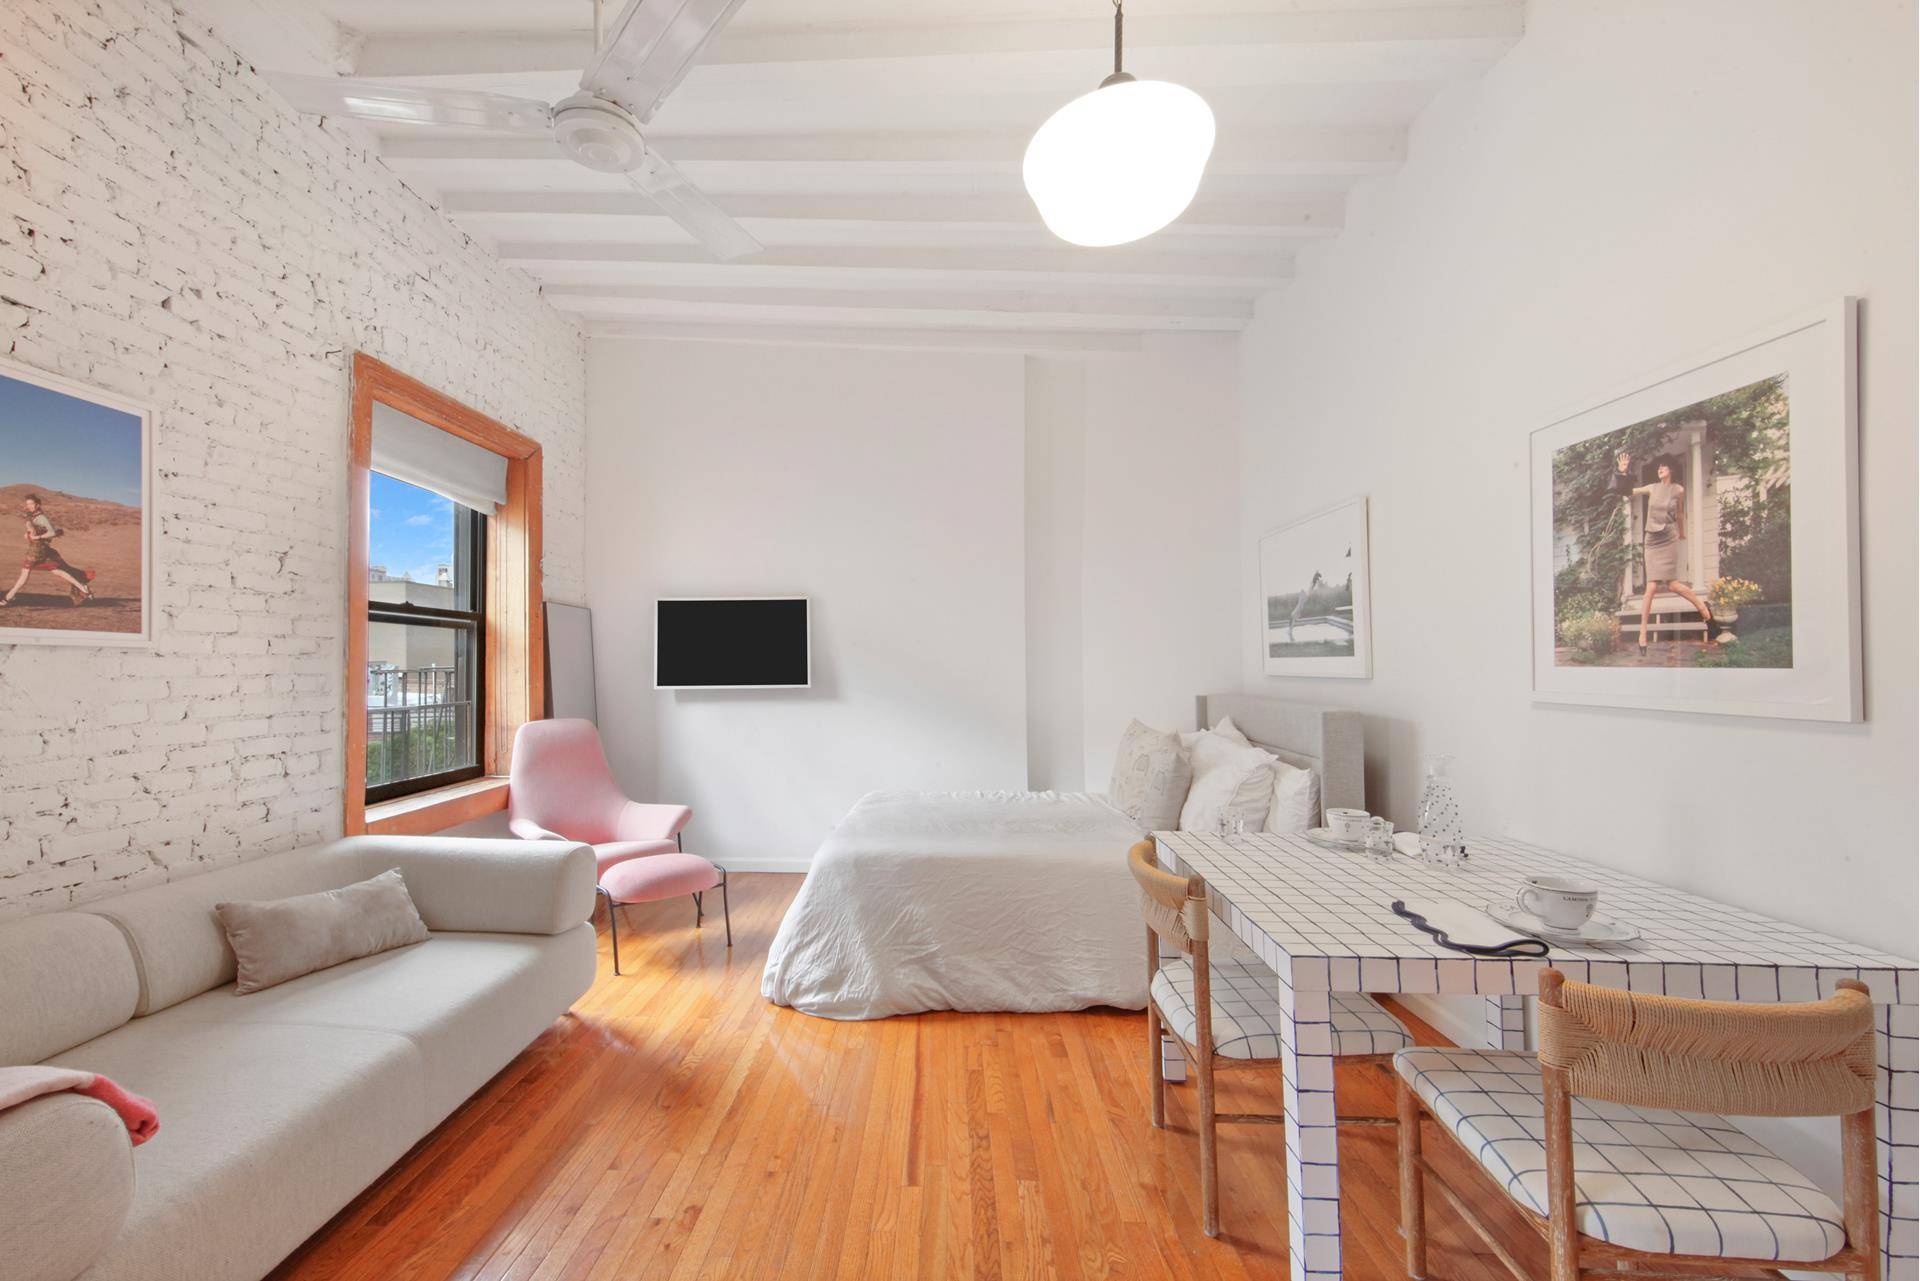 Located at the nexus of the LES, Nolita, and East Village, this top floor, newly renovated loft encapsulates quintessential pre war charm.